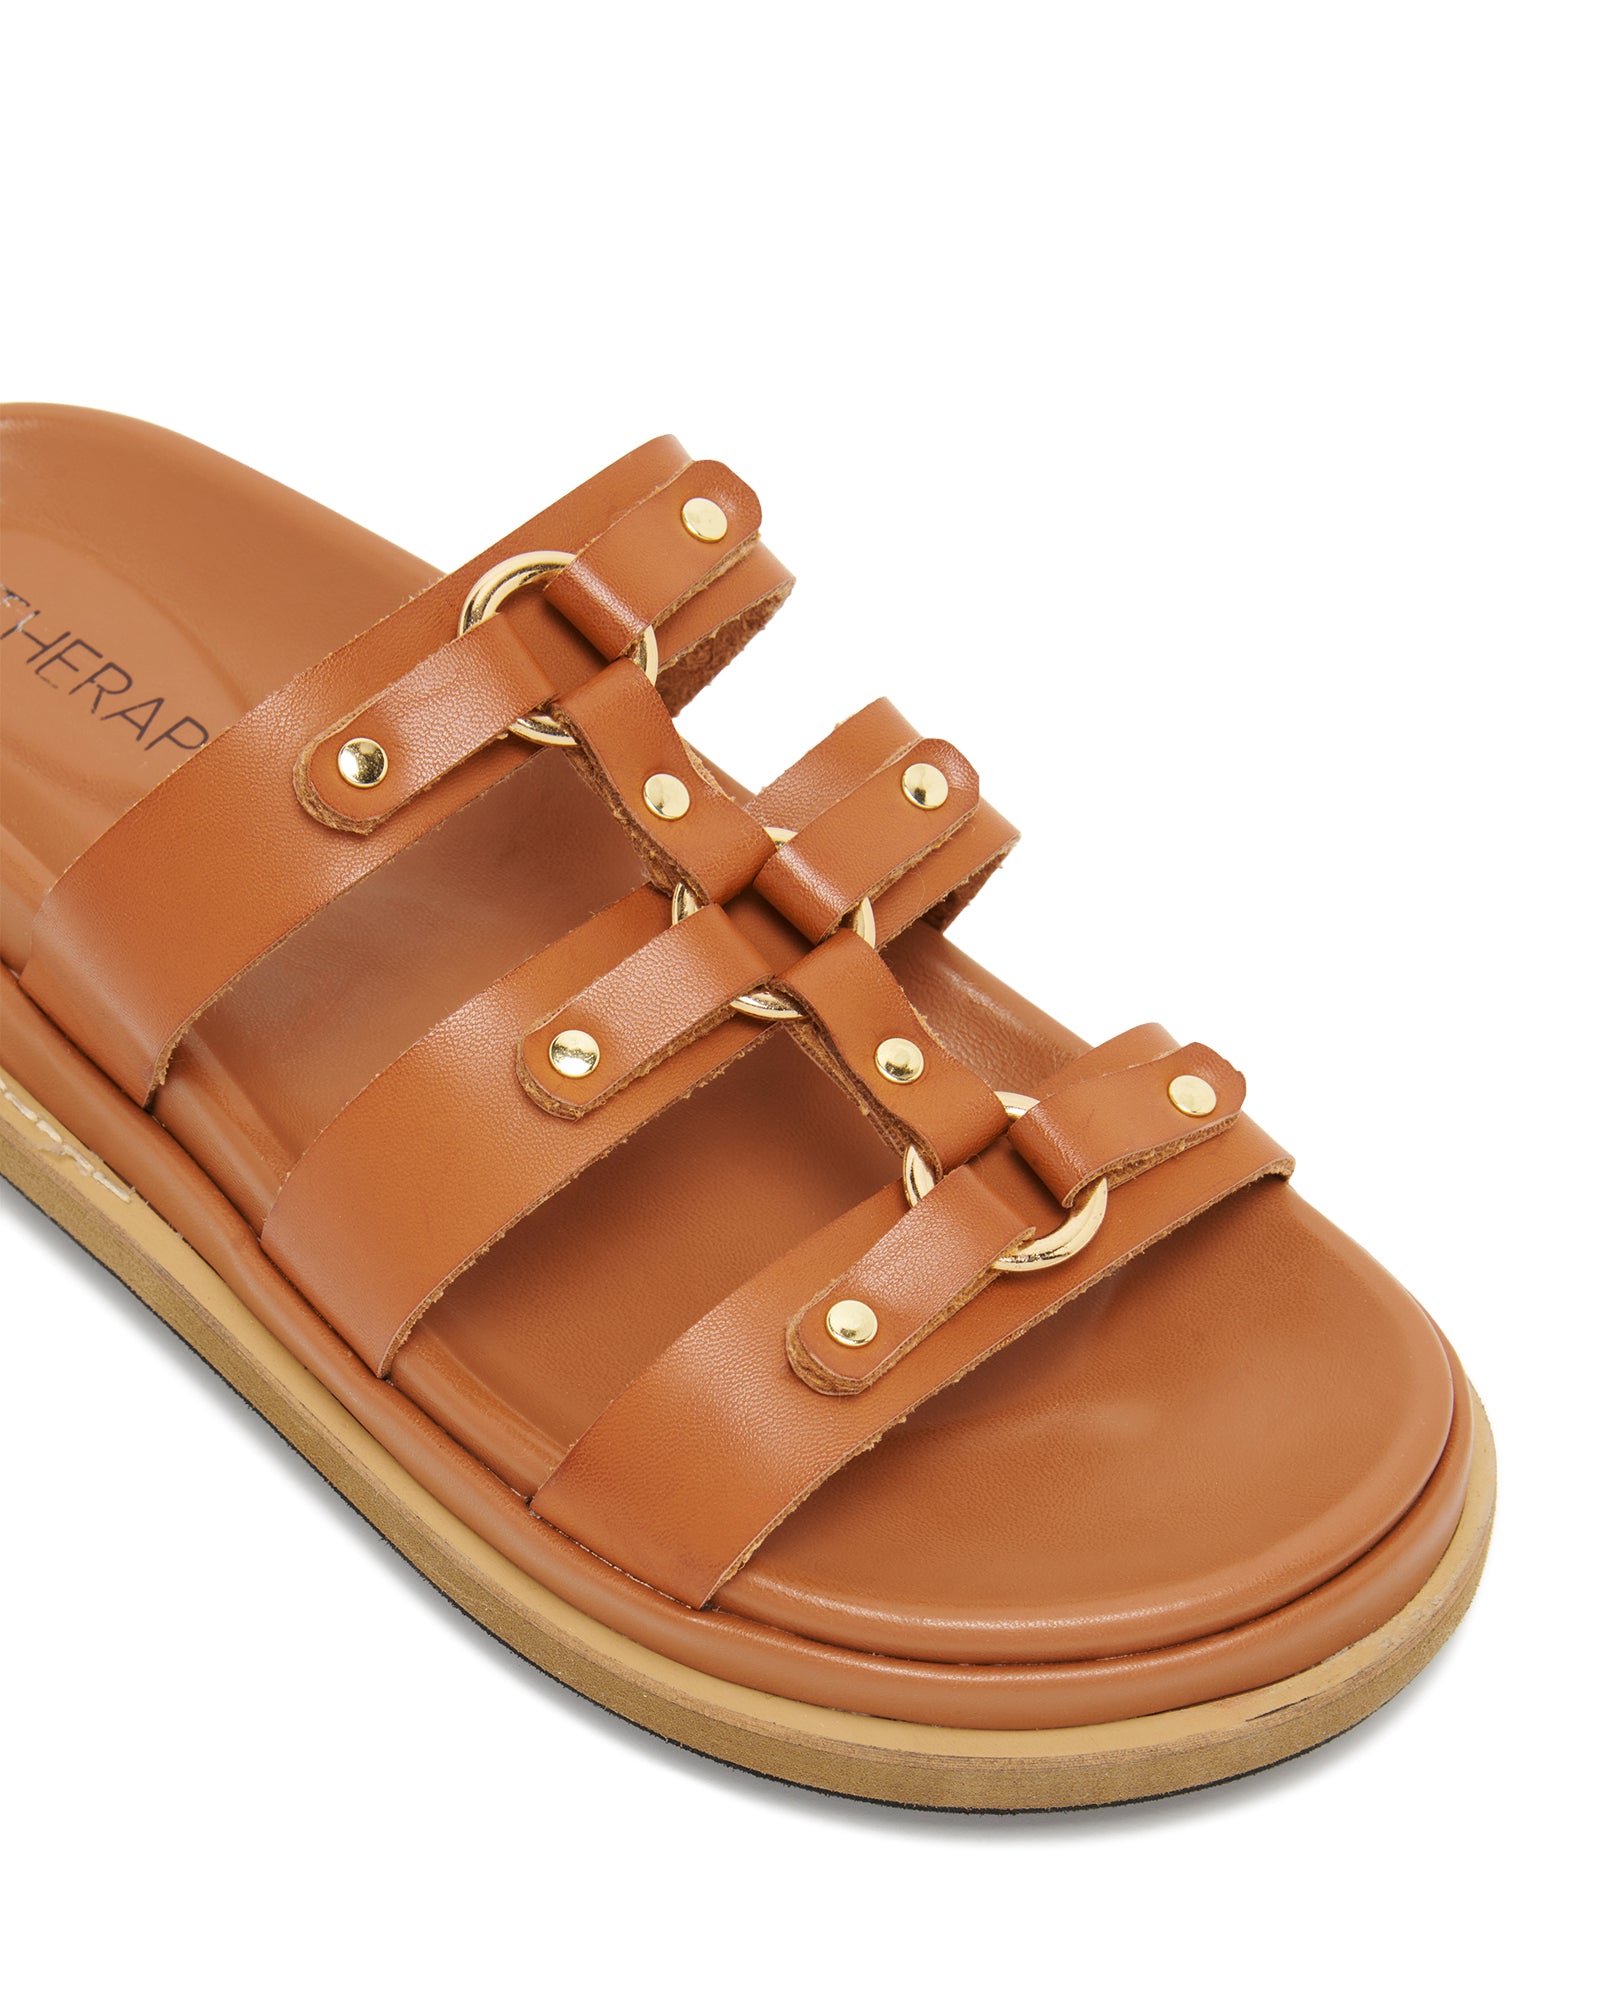 Therapy Shoes Codii Tan | Women's Sandals | Flatform | Chunky | Footbed